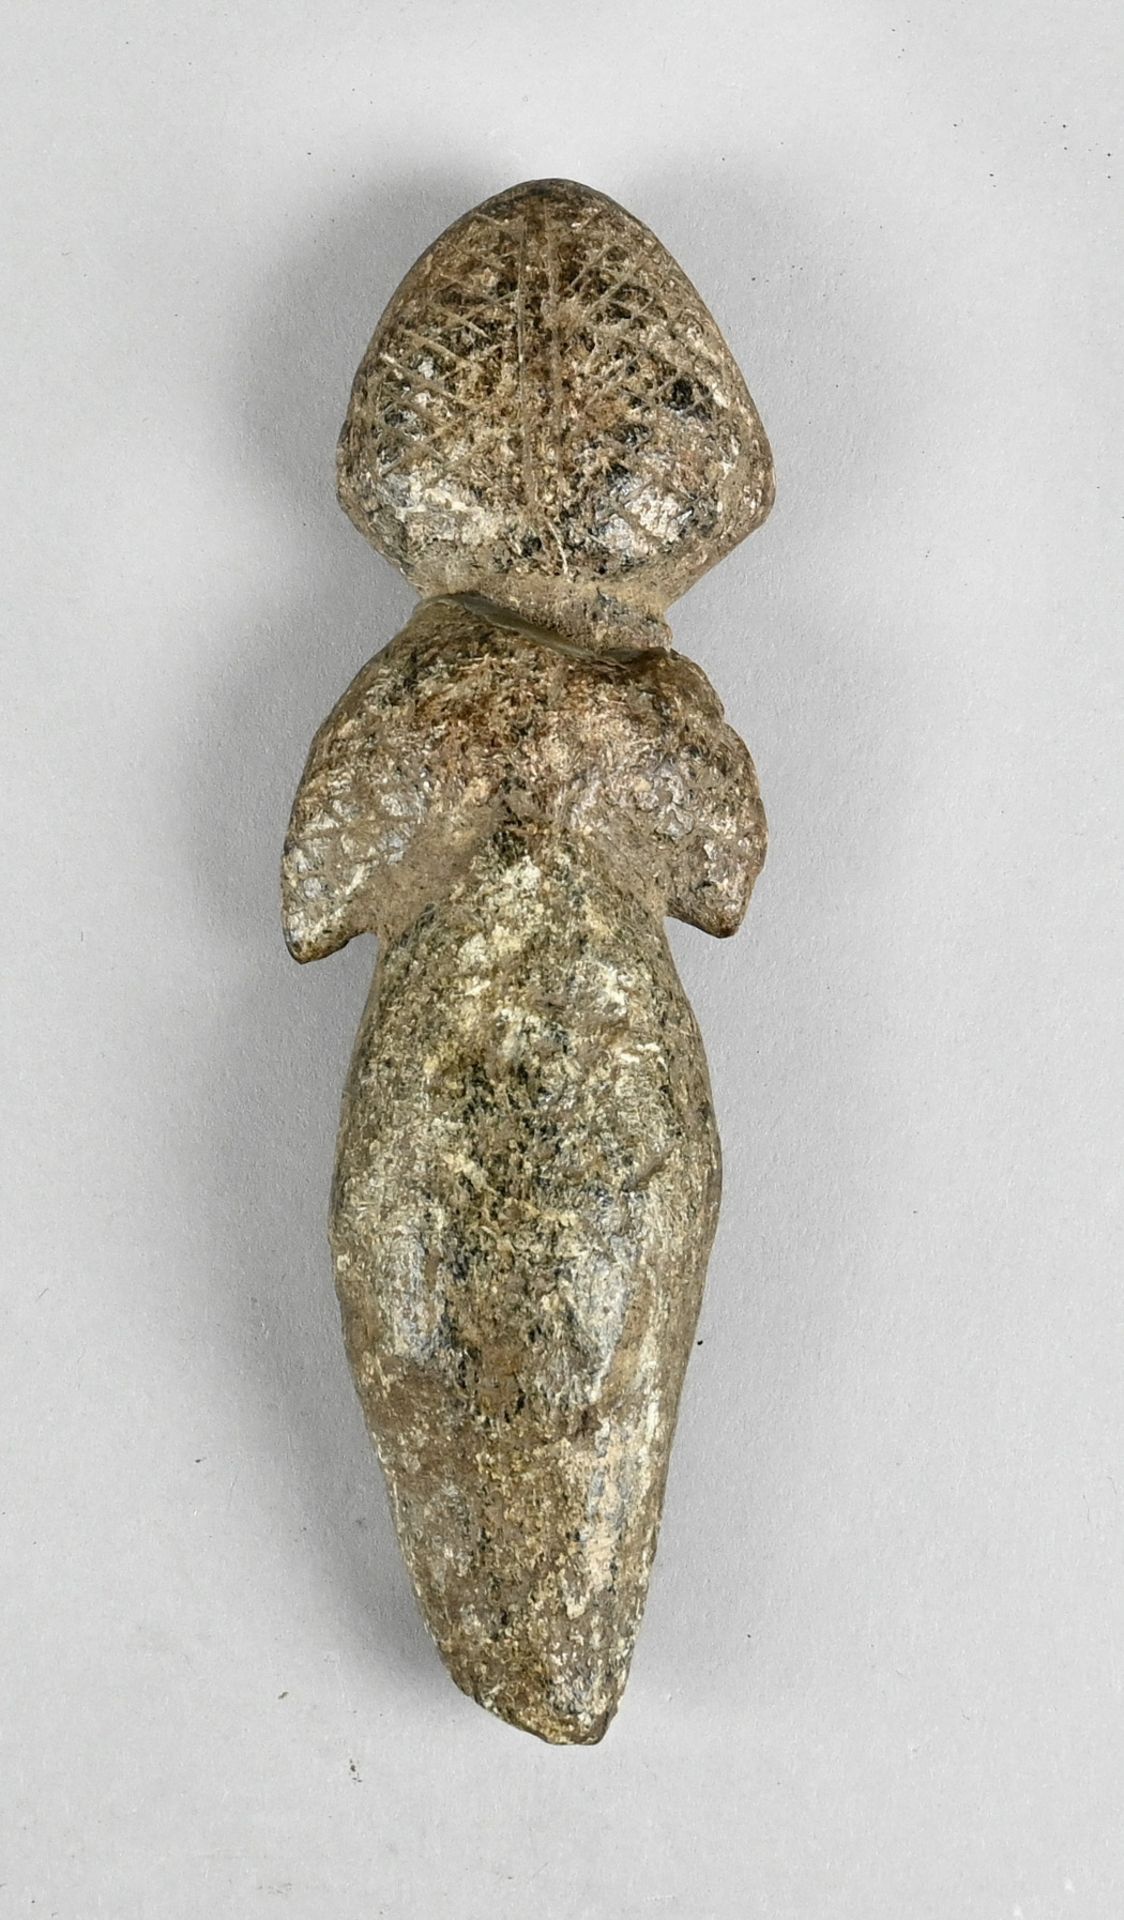 Archaic amulet, anthropomorphic, short arms, antique clay figure, height 17 cm, damaged - Image 2 of 2